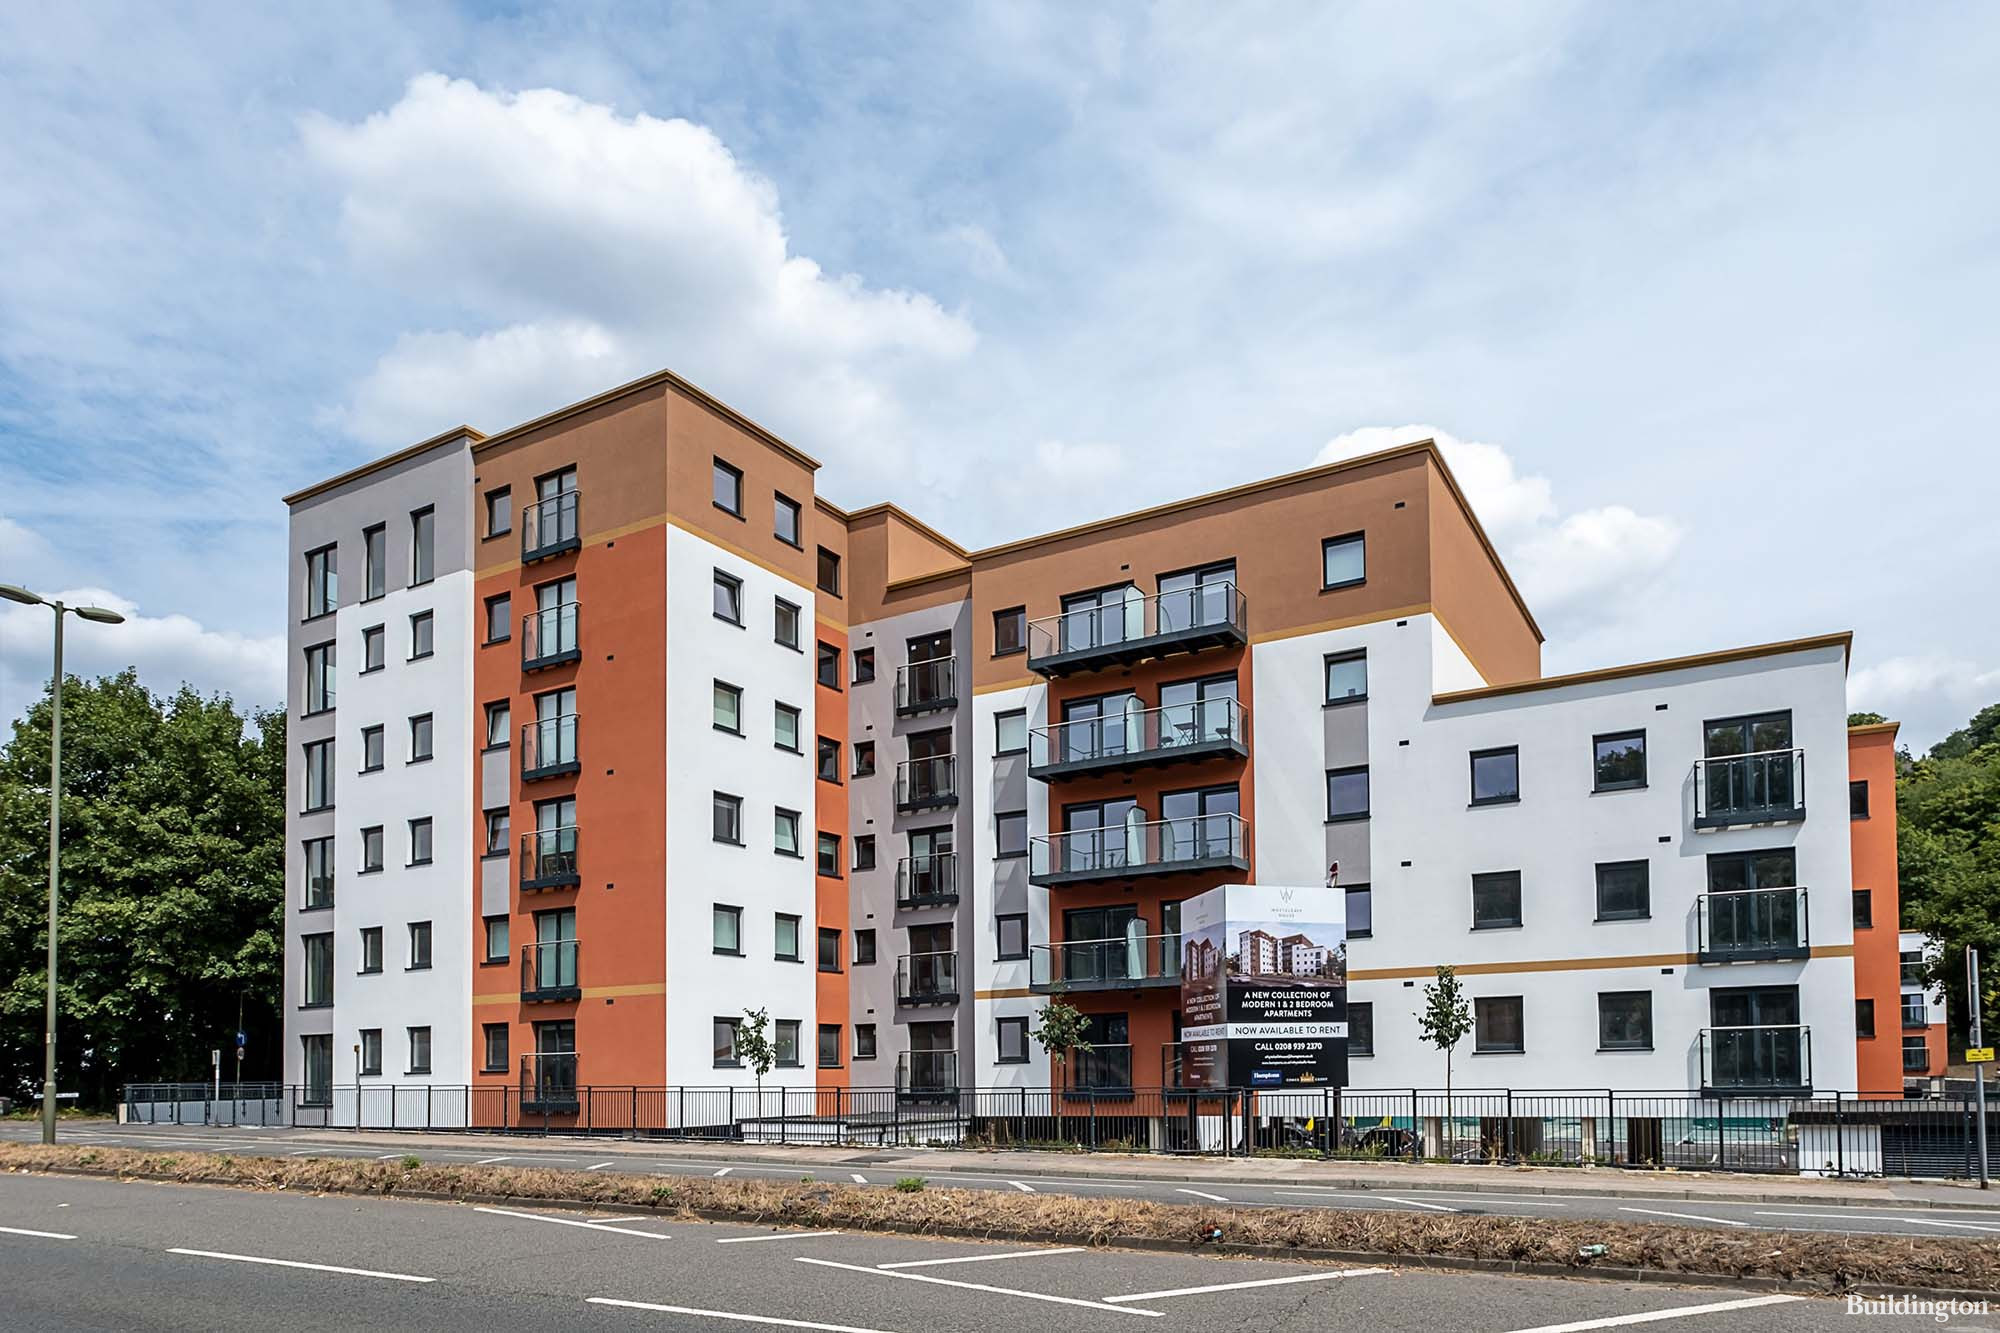 Whyteleafe House Build-to-Rent development by Comer Homes in Surrey, England